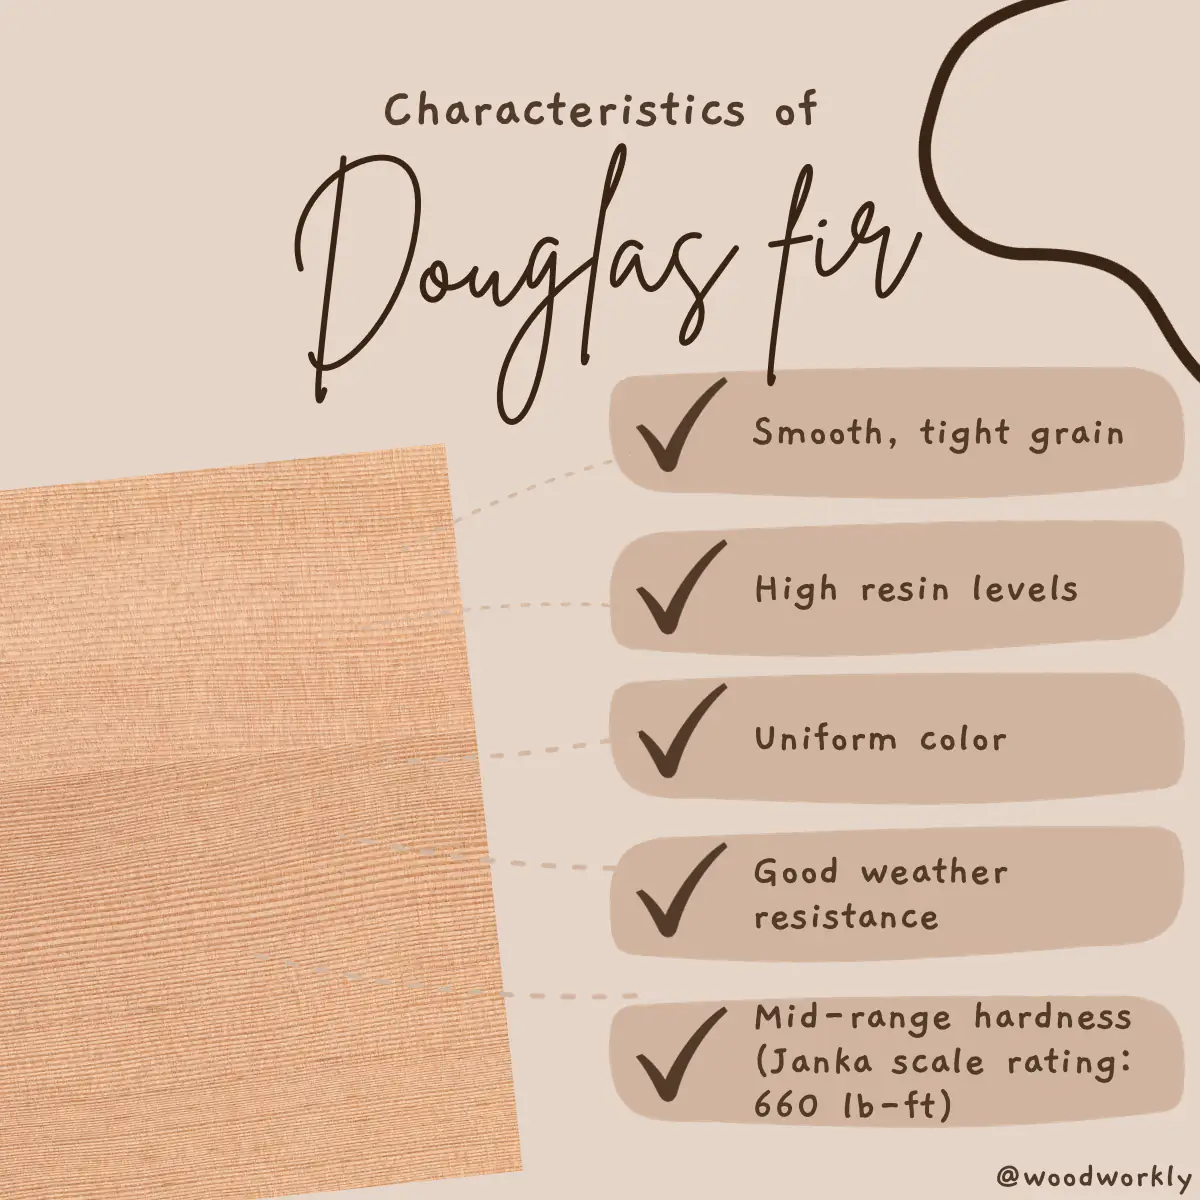 Characteristic features of Douglas fir